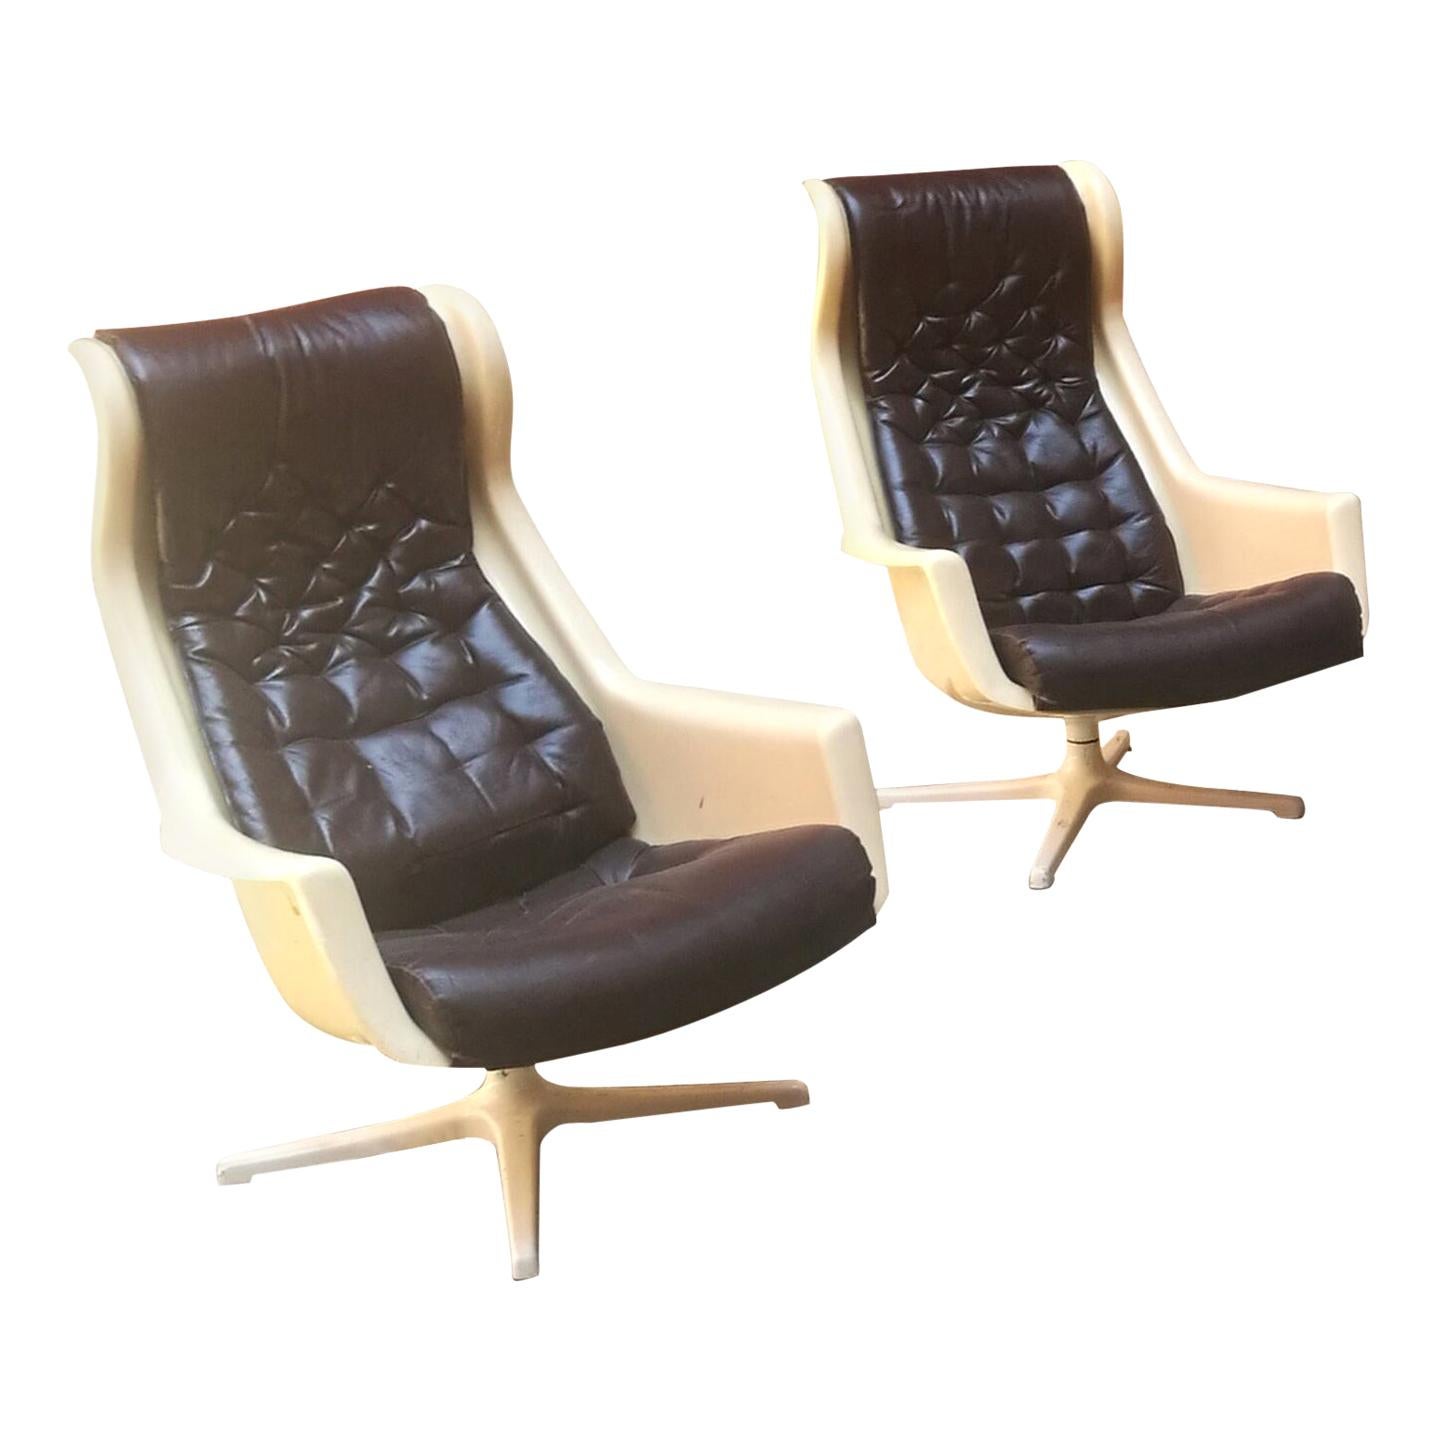 Swedes midcentury modern space age armchairs Galaxy by Alf Svensson for Dux 1968